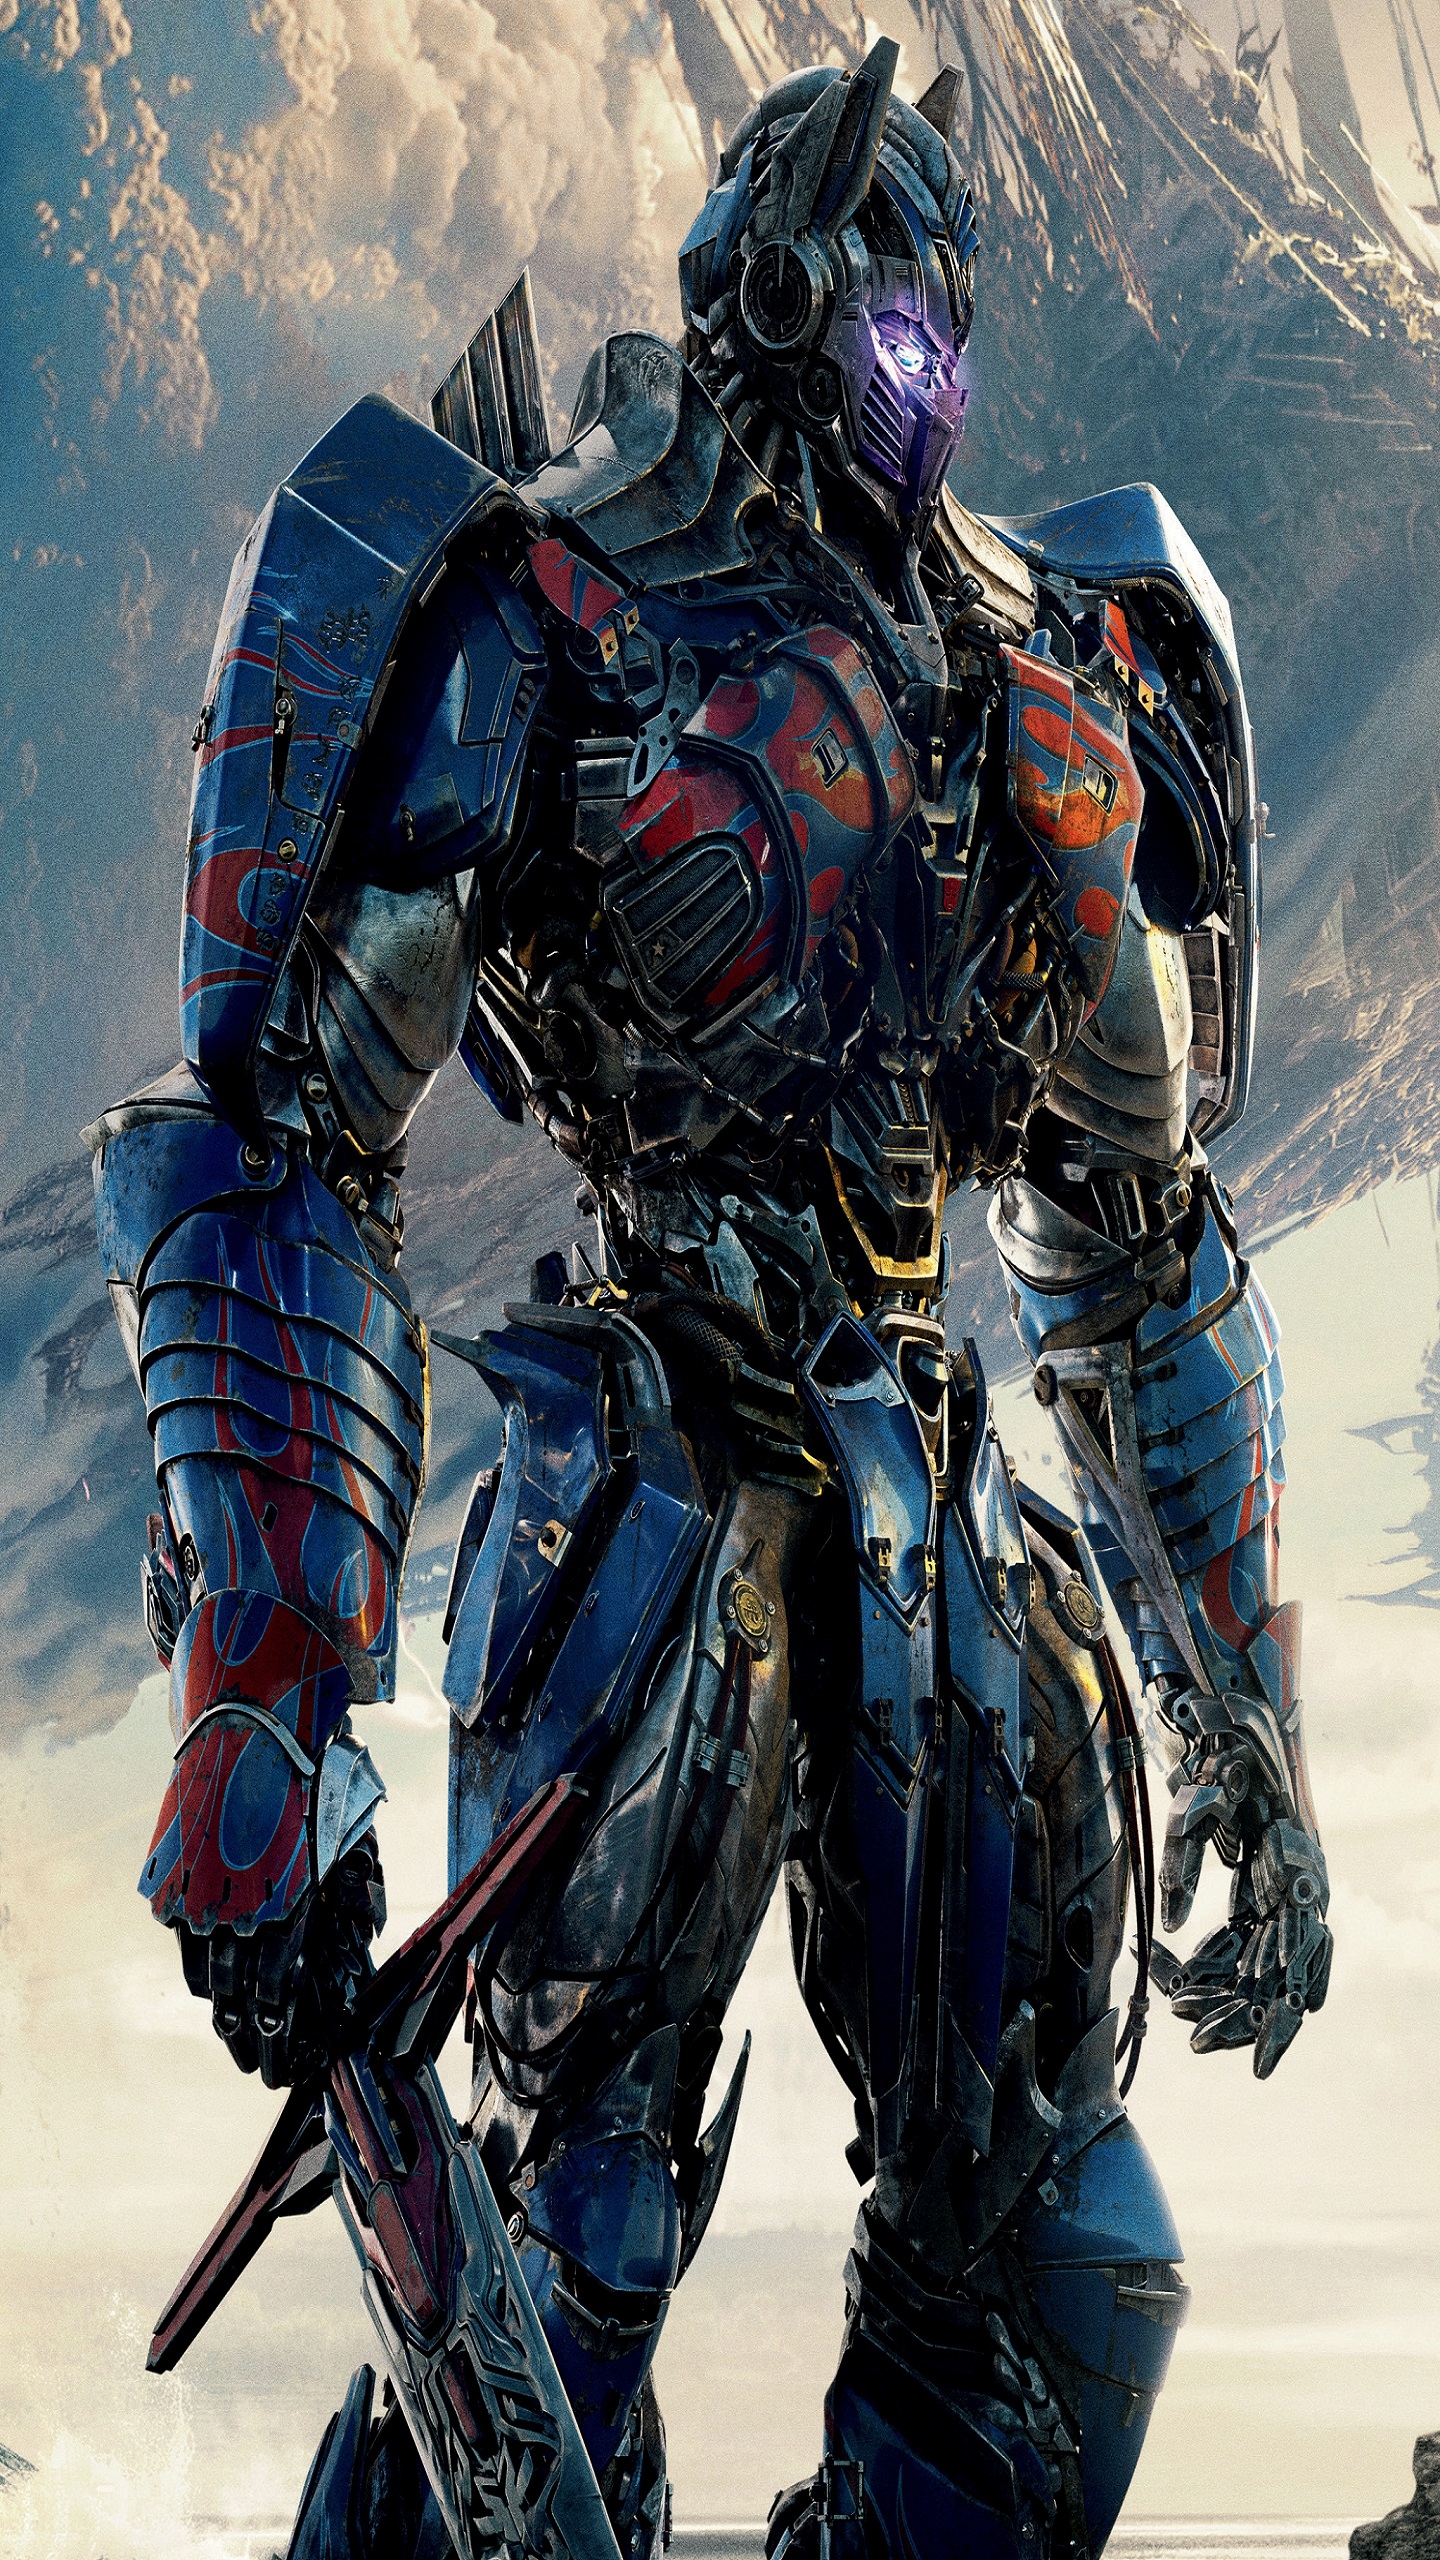 Optimus Prime Transformers The Last Knight for Samsung S7 & S7 Edge resolution